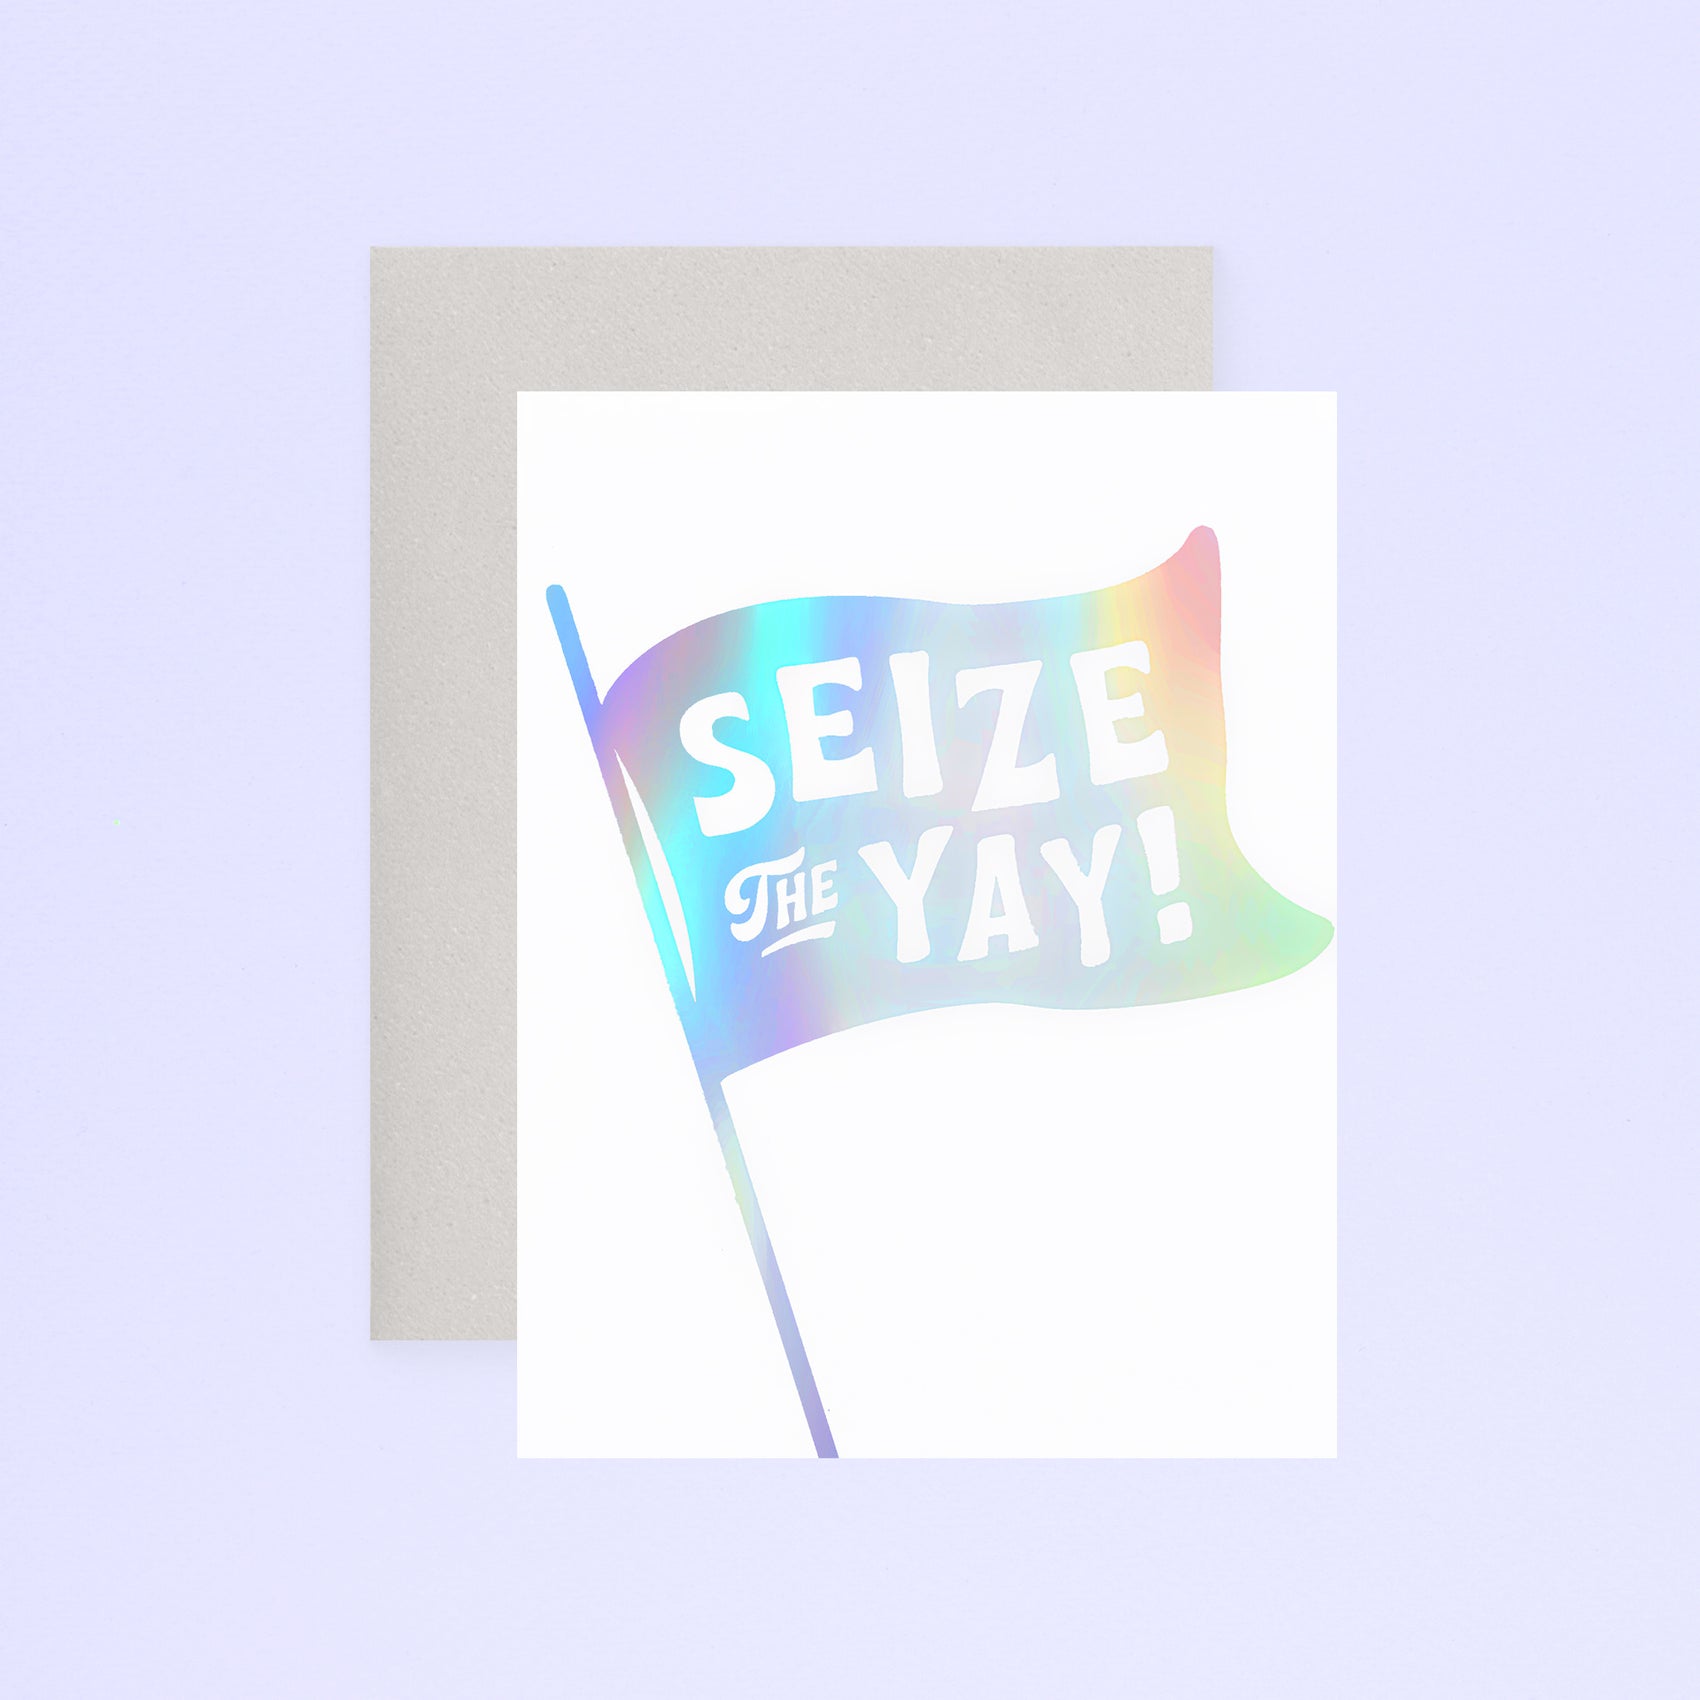 Seize the Yay Greeting Card